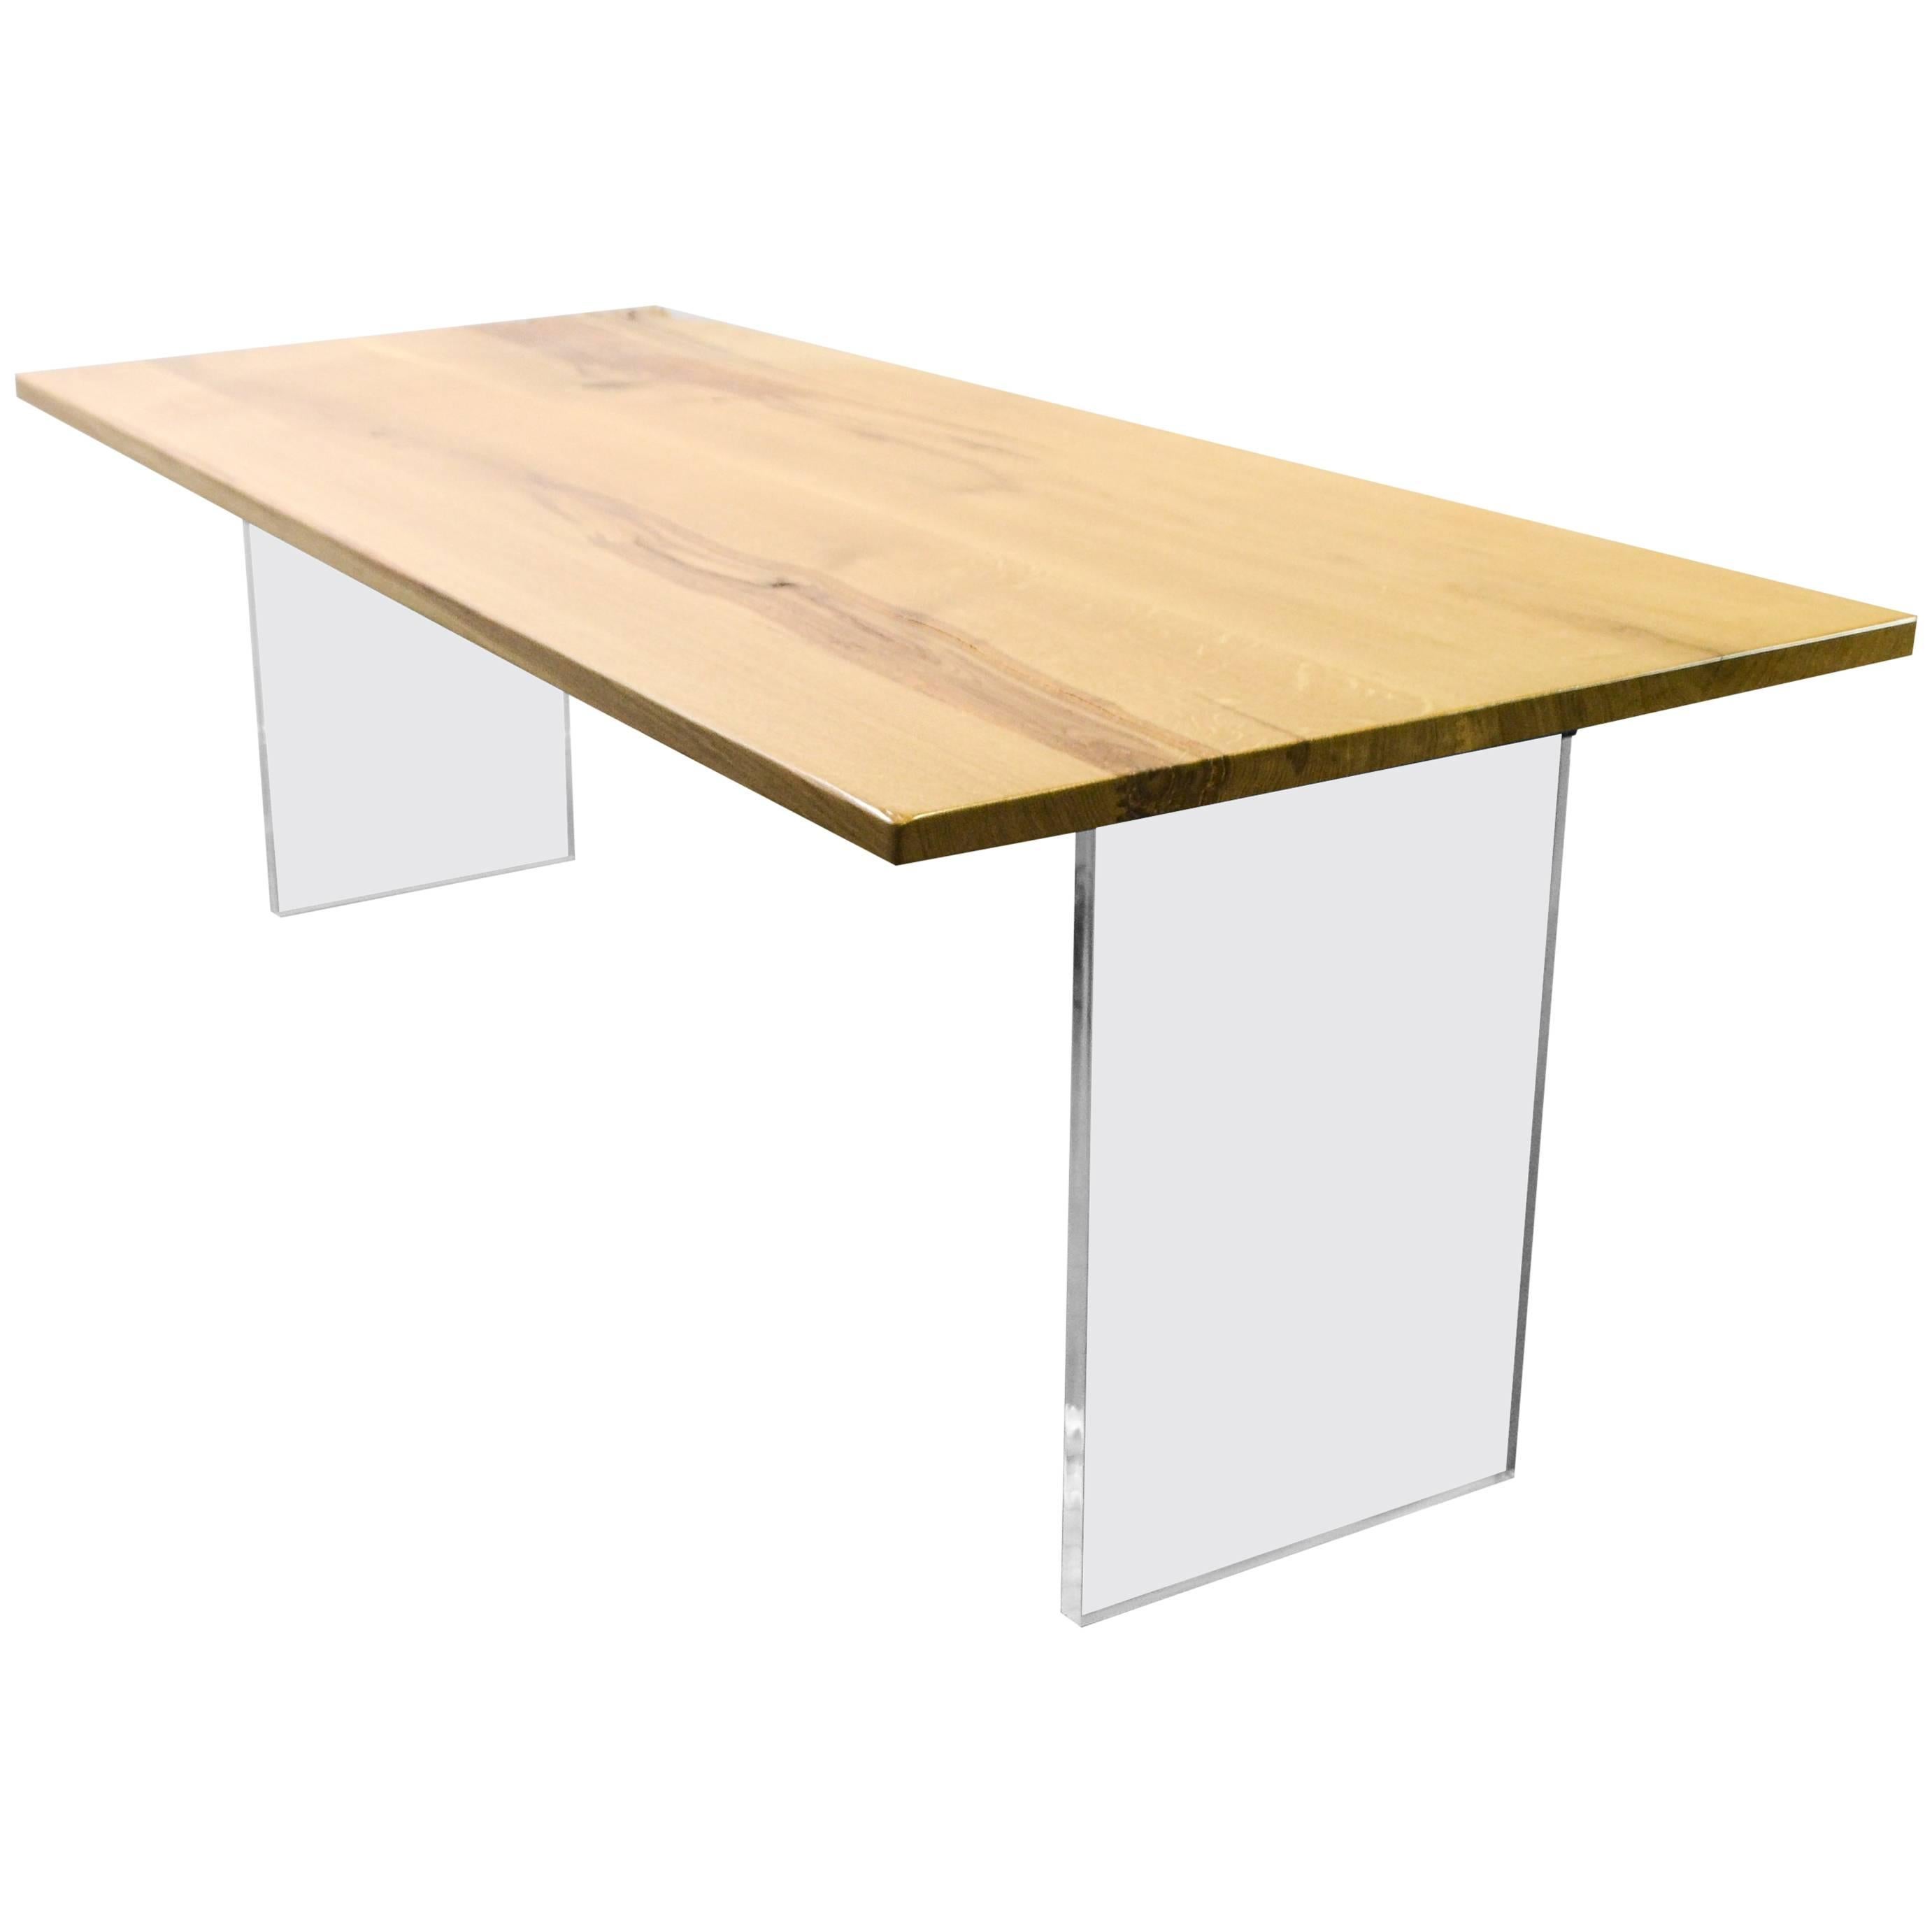 Natural Character Oak Slab Dining Table on Perspex Base For Sale